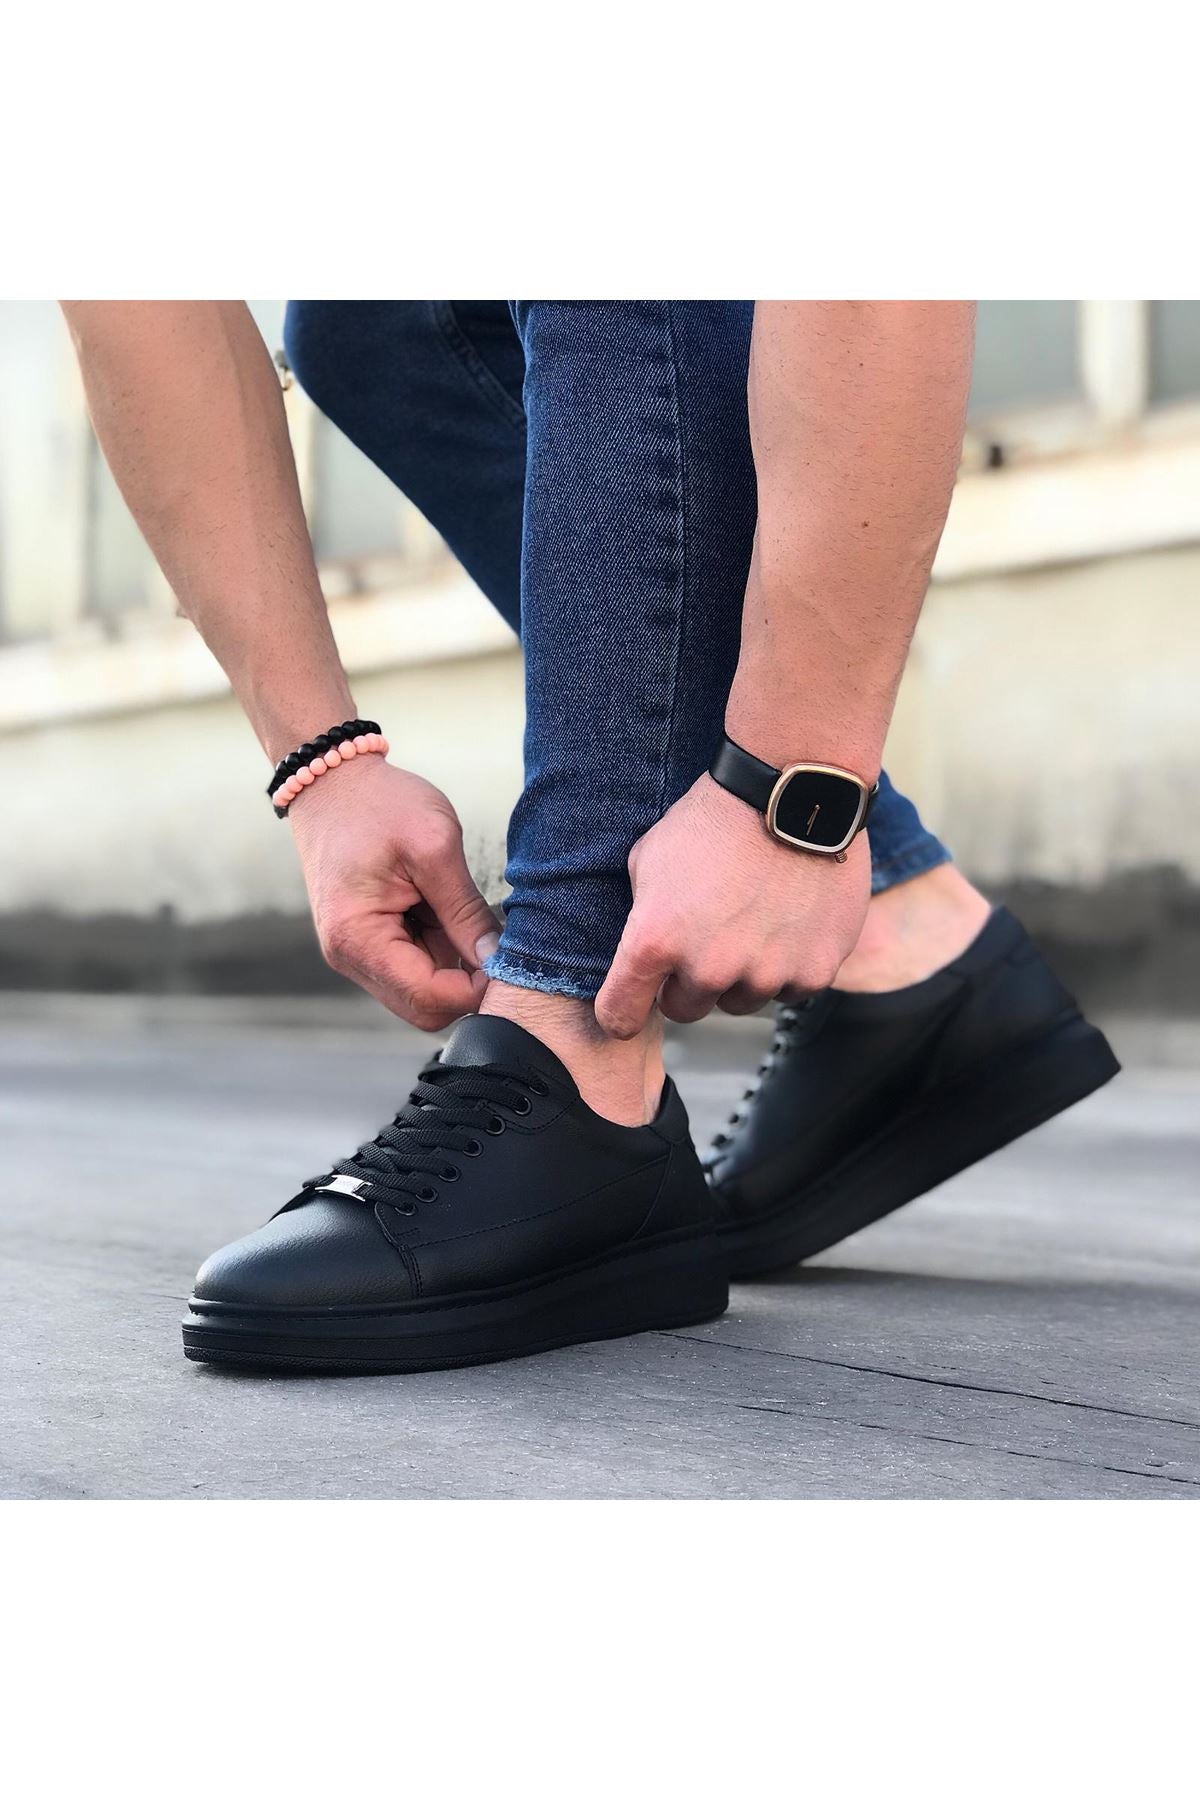 WG028 Denim Coal Lace-Up Thick Sole Casual Men's Shoes - STREETMODE™